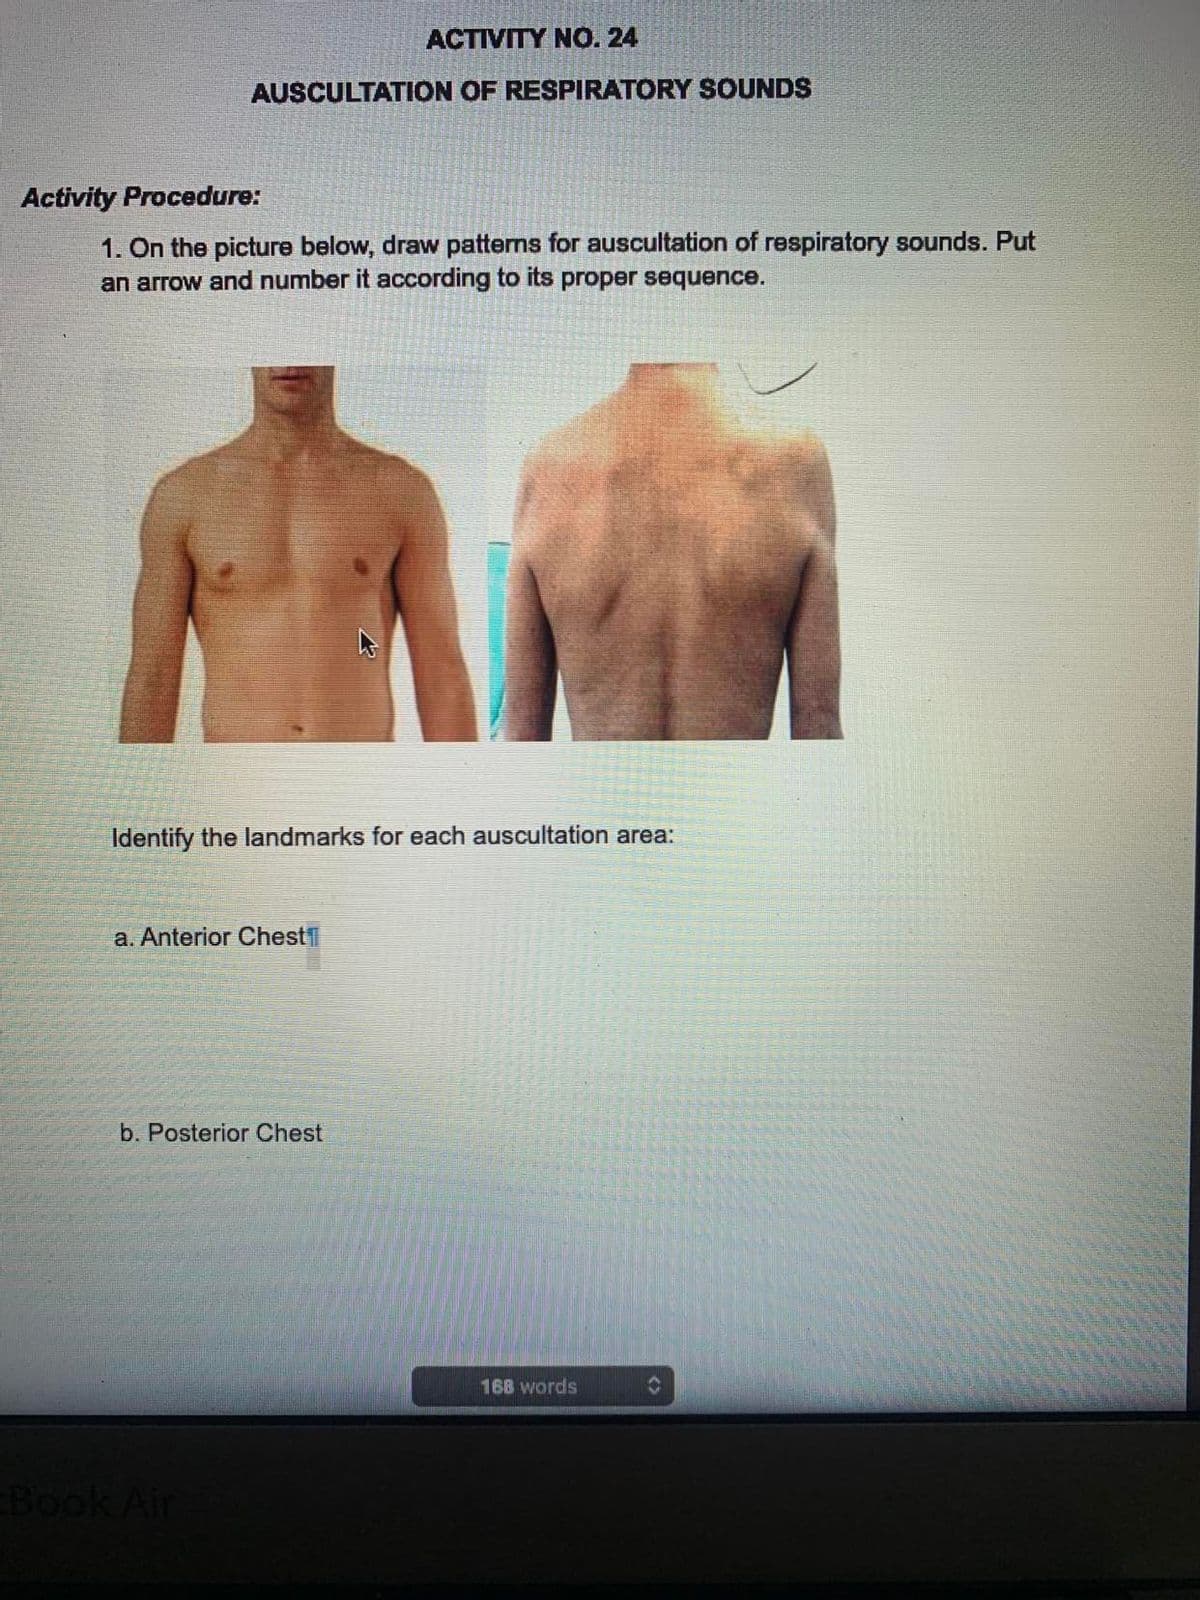 ACTIVITY NO. 24
AUSCULTATION OF RESPIRATORY SOUNDS
Activity Procedure:
1. On the picture below, draw patterns for auscultation of respiratory sounds. Put
an arrow and number it according to its proper sequence.
Identify the landmarks for each auscultation area:
a. Anterior Chest
b. Posterior Chest
Book Air
168 words